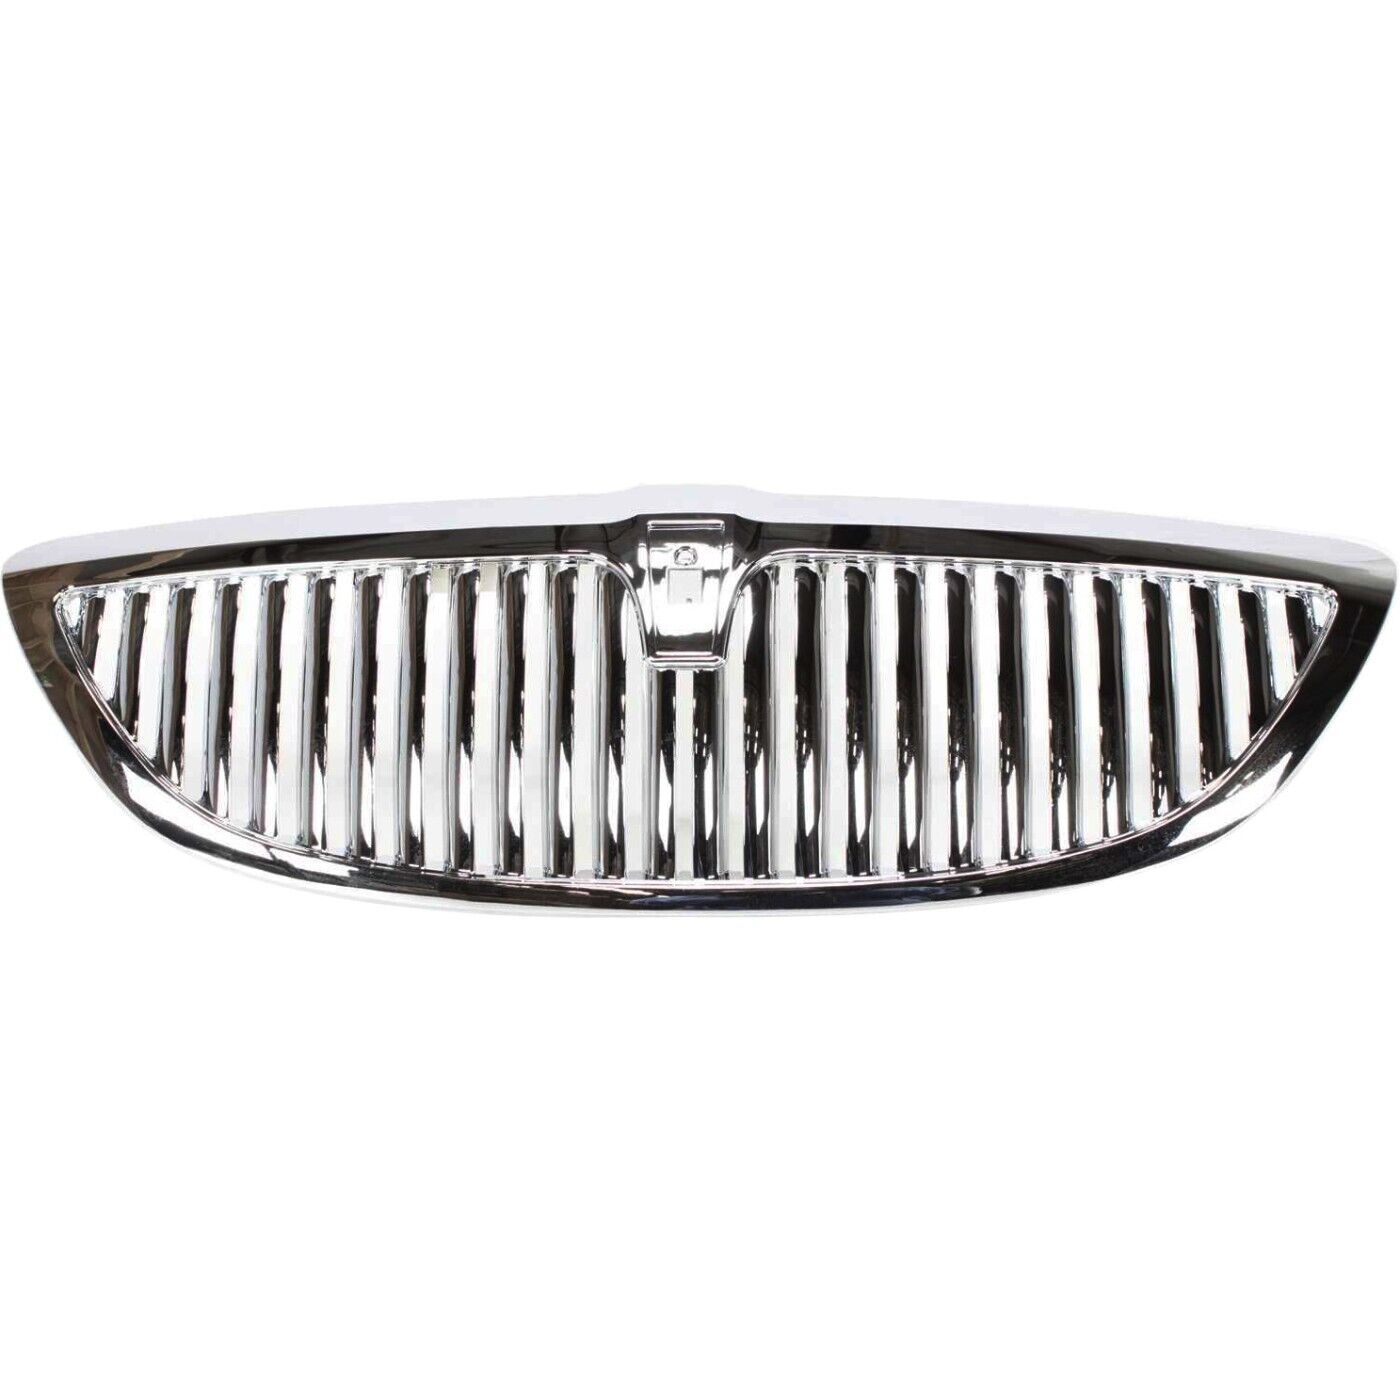 Grille For 03-11 Lincoln Town Car Chrome Shell and Insert with emblem provision